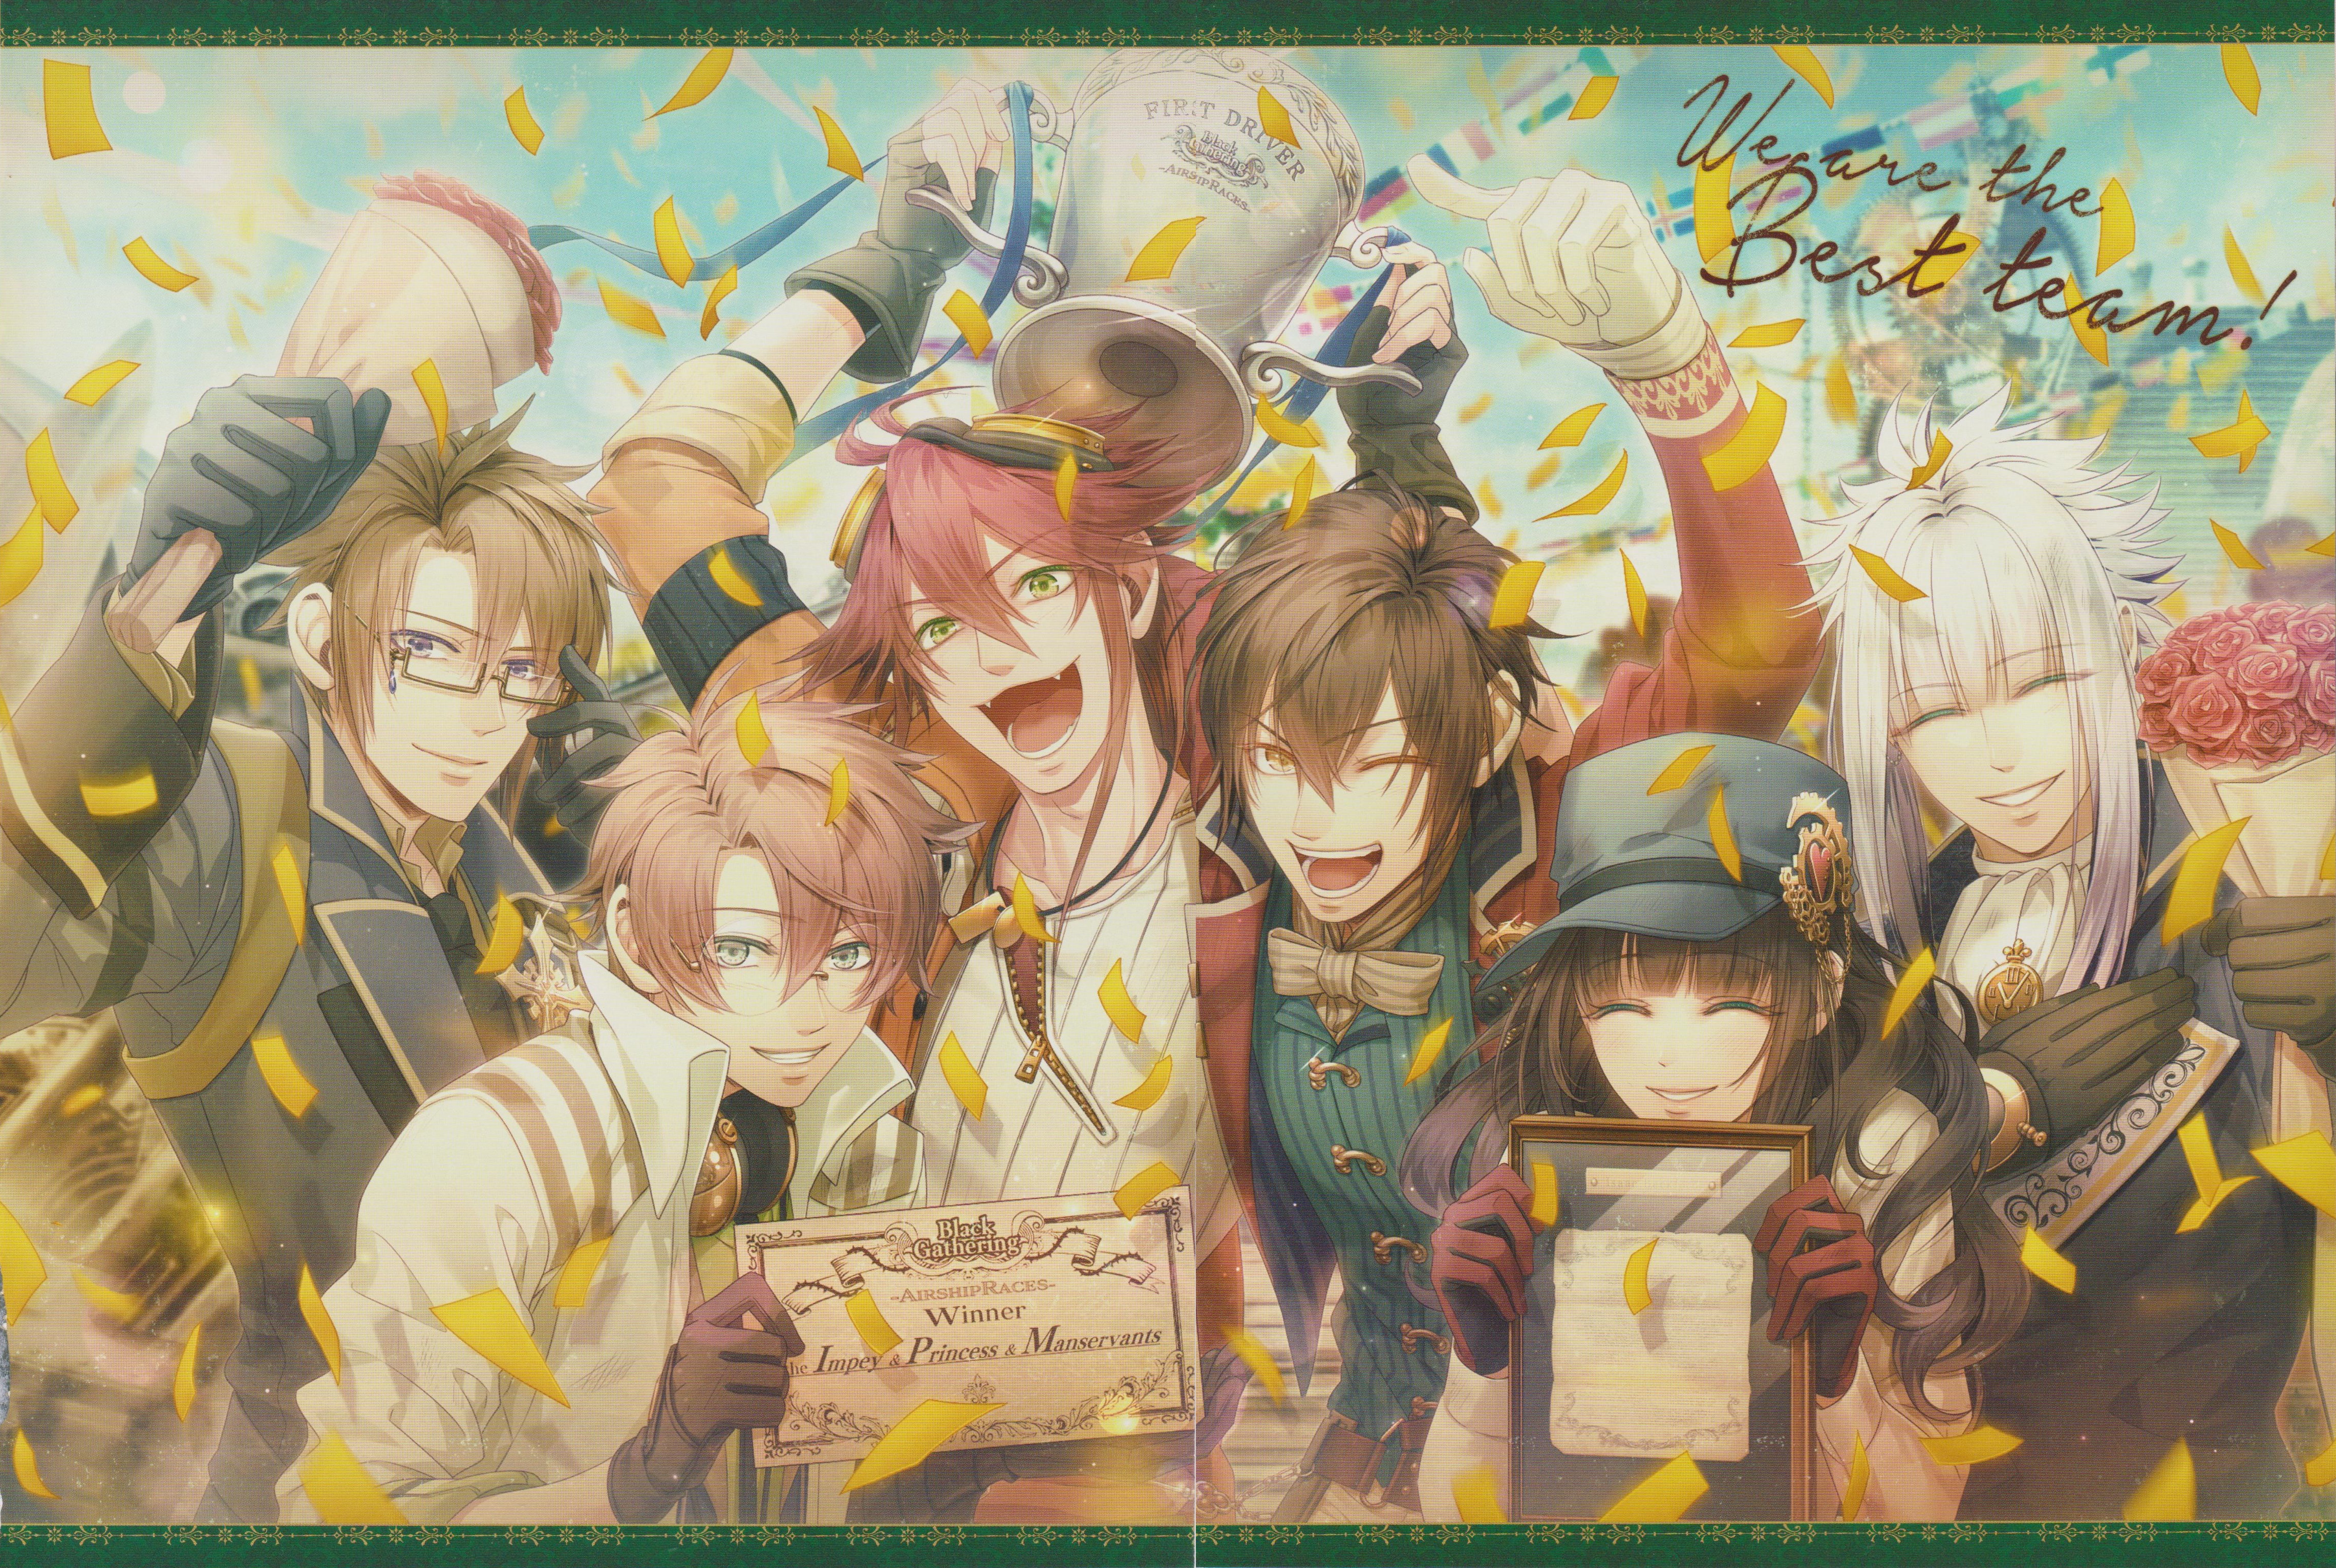 Video Game Code: Realize HD Wallpaper | Background Image